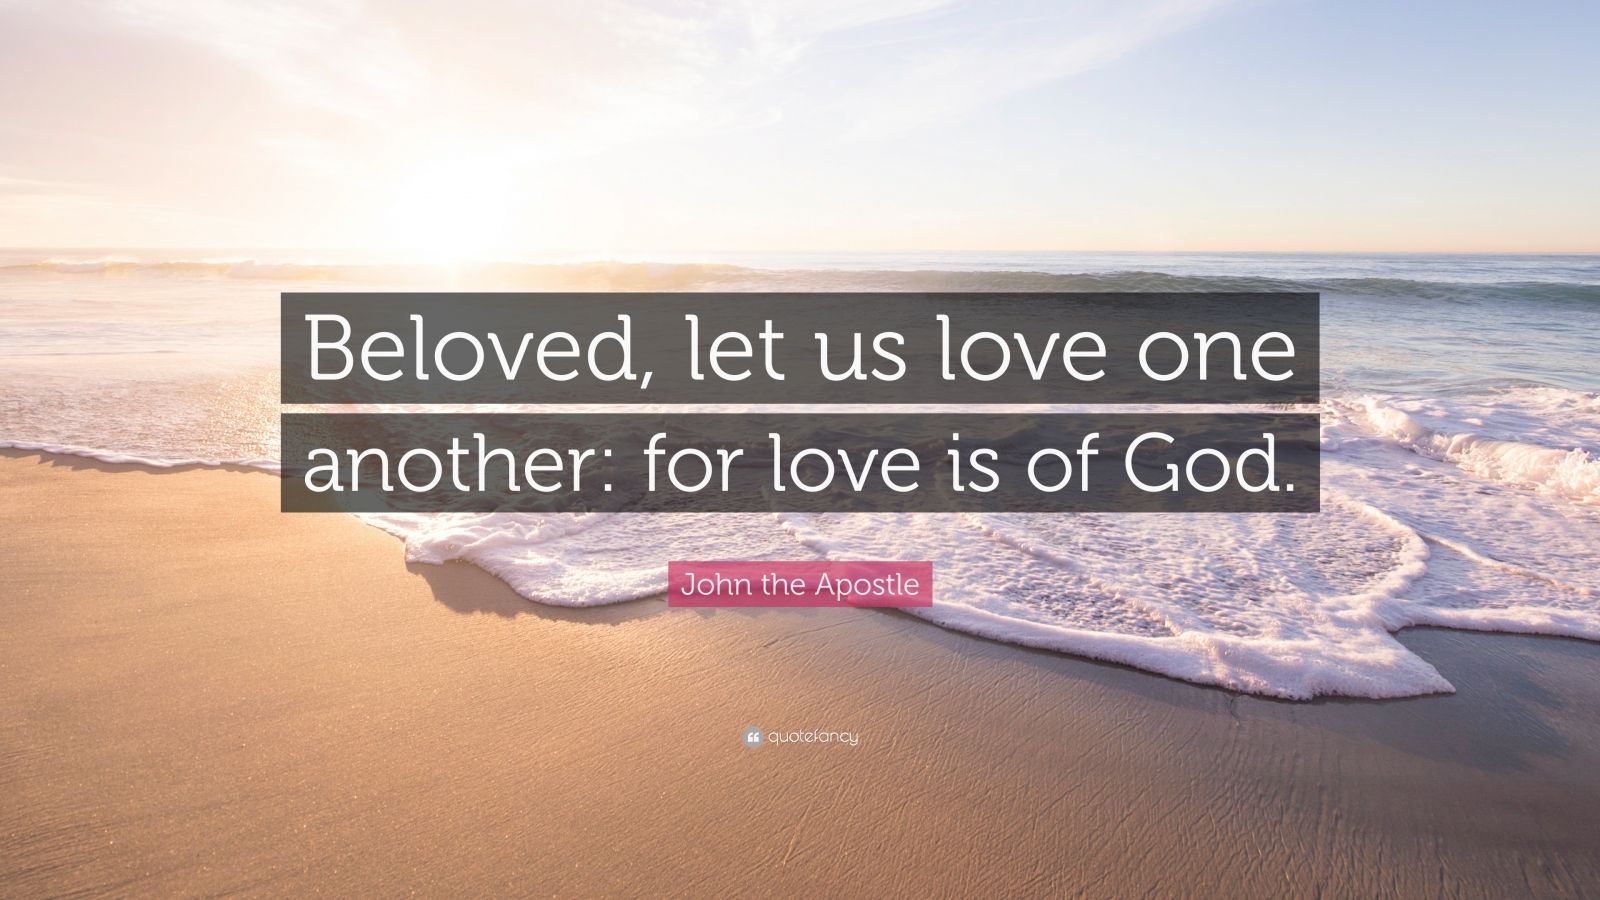 John the Apostle Quote: "Beloved, let us love one another ...